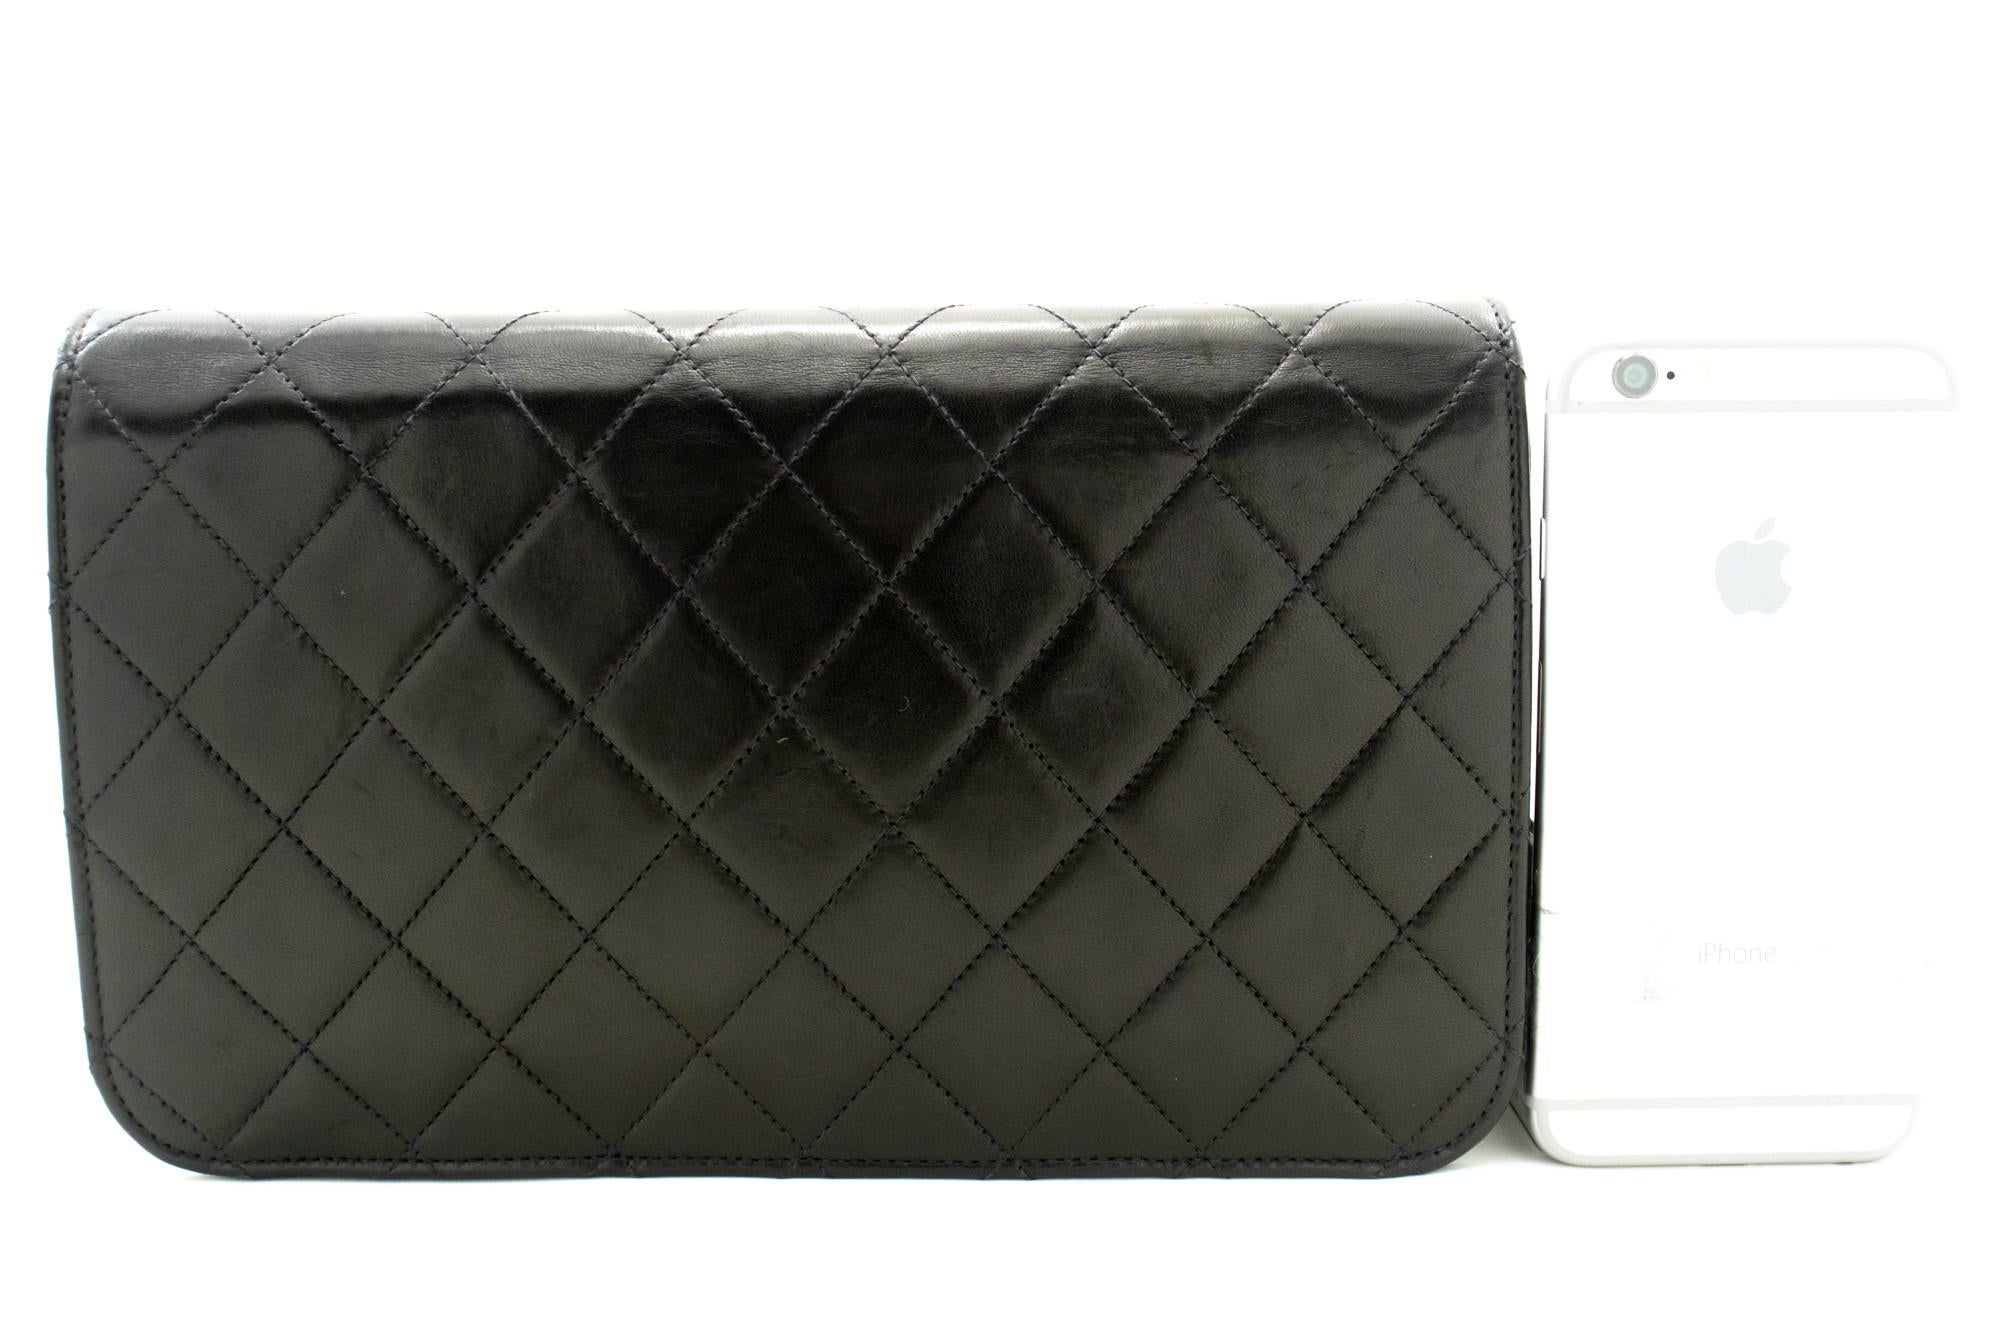 CHANEL Full Chain Flap Shoulder Bag Black Clutch Quilted Lambskin In Good Condition For Sale In Takamatsu-shi, JP